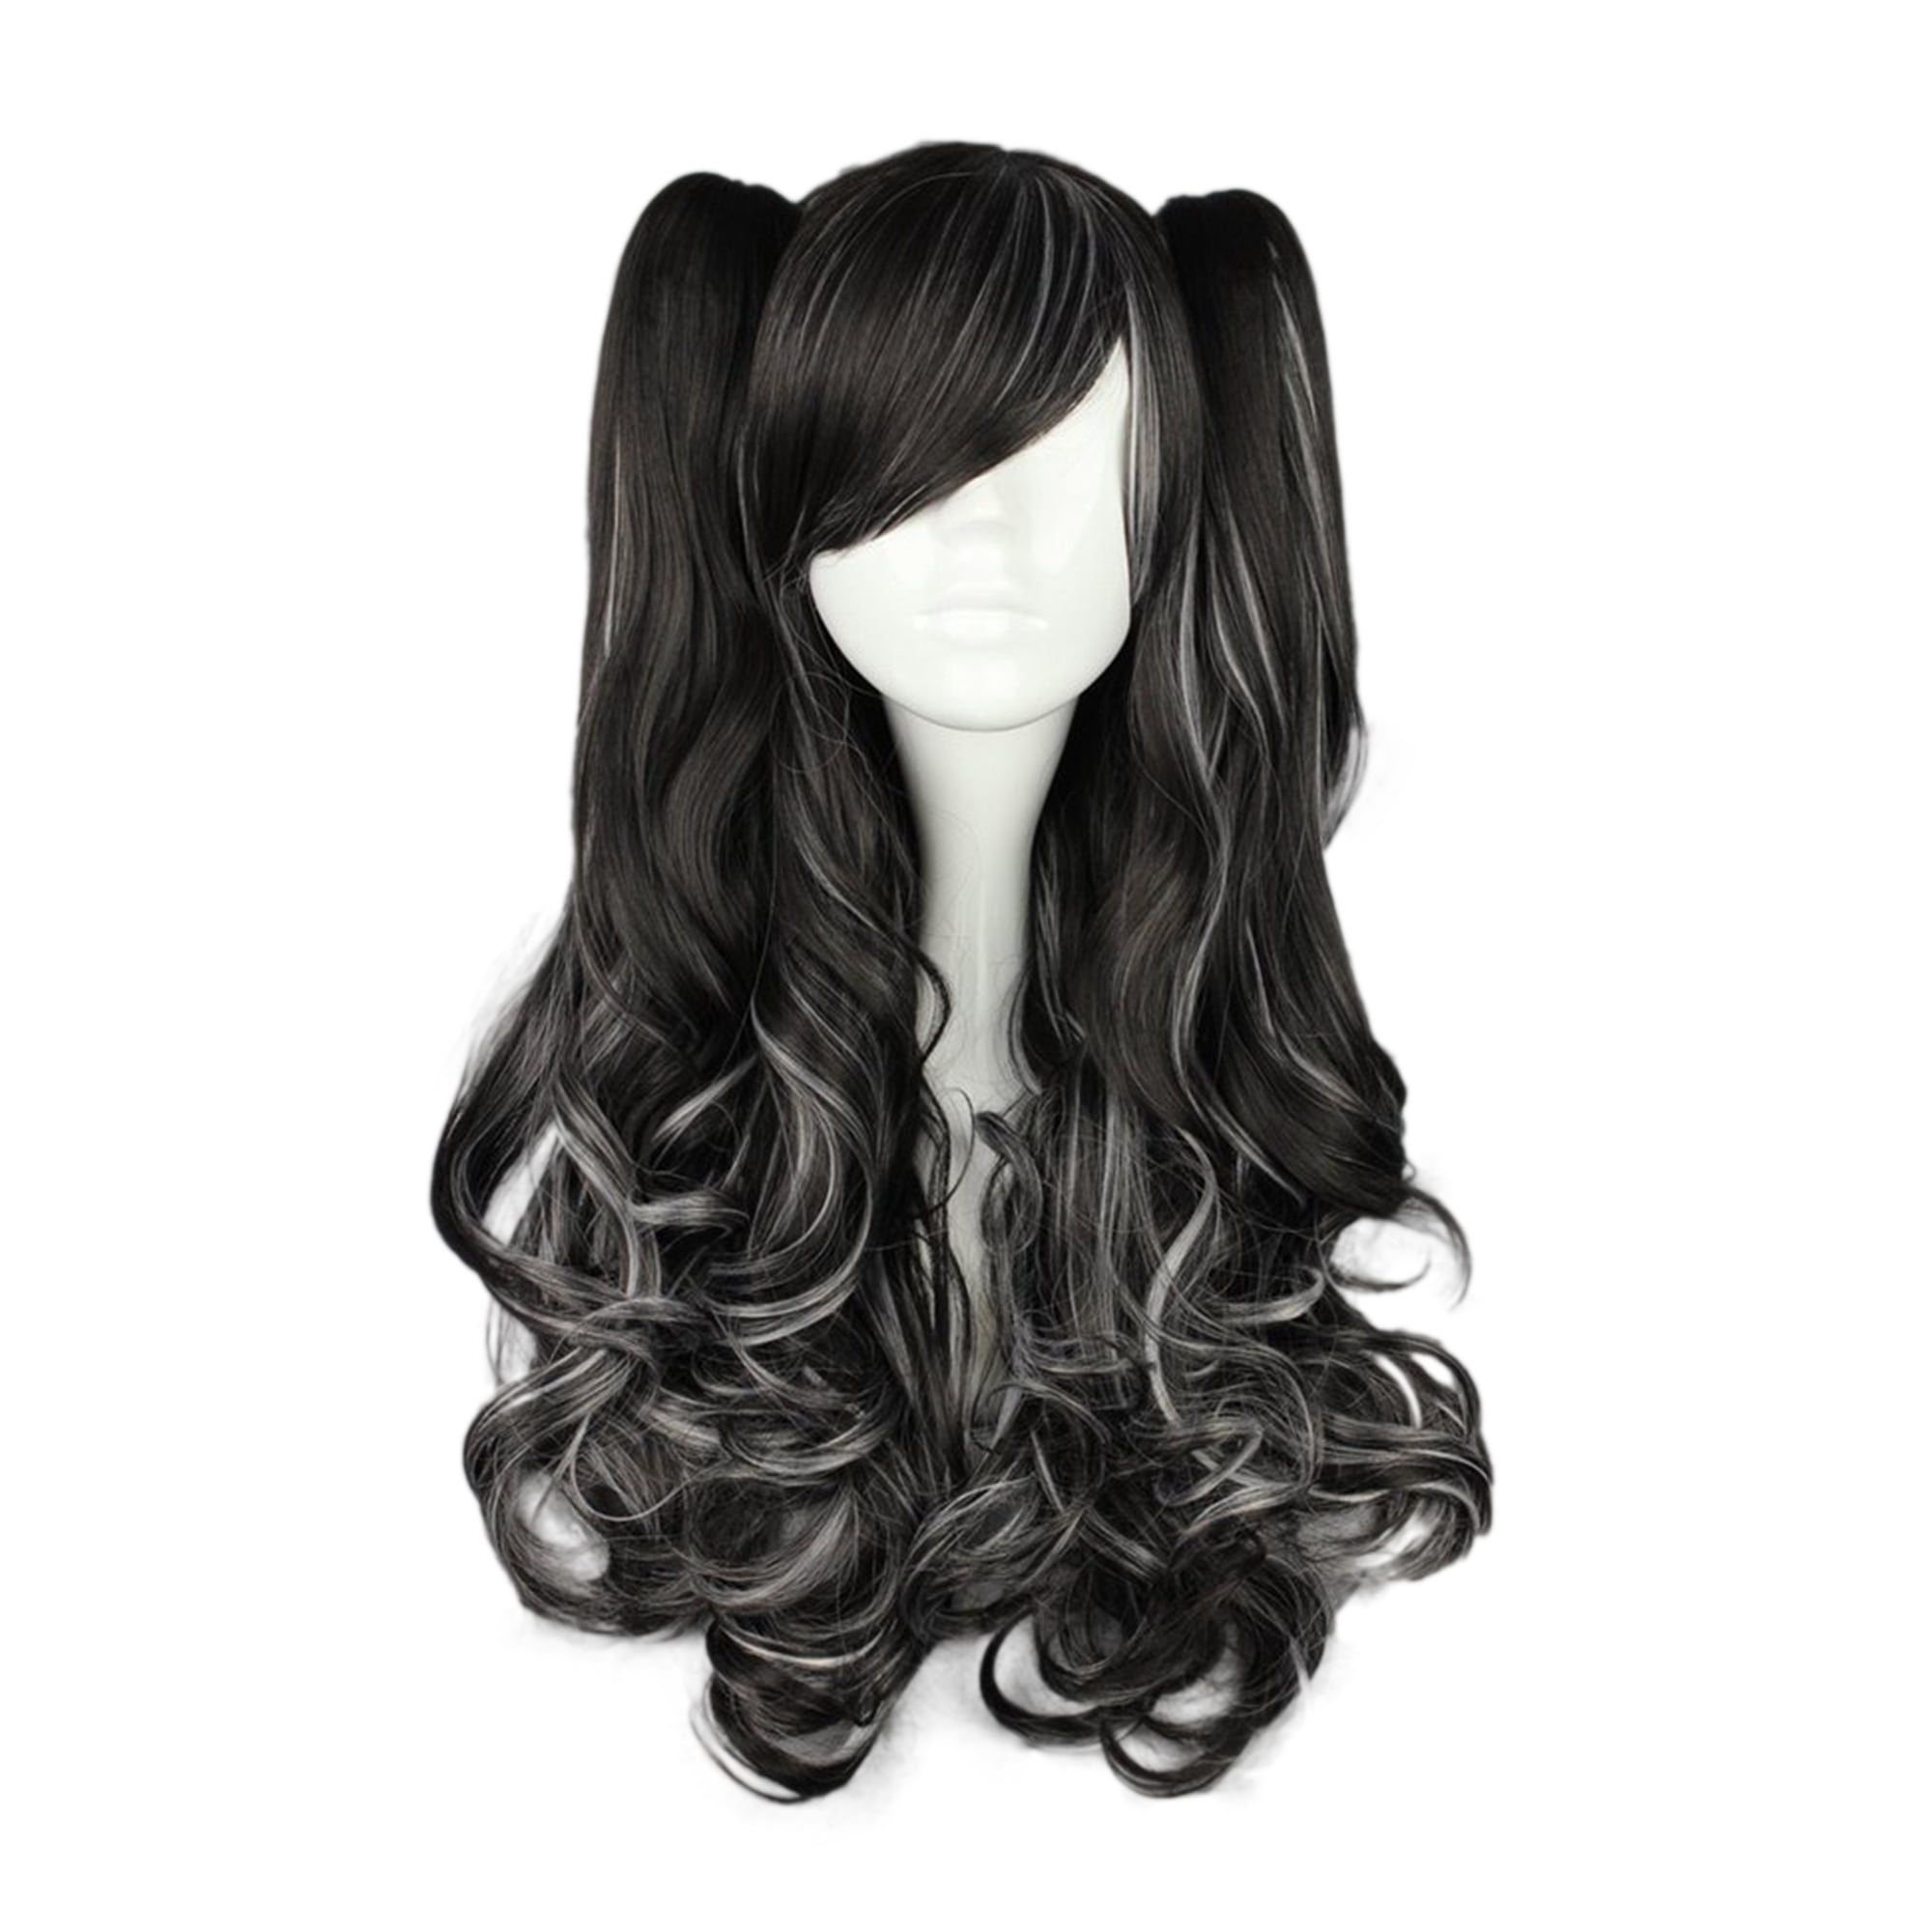 Unique Bargains Curly Wig Wigs for Women 28 Black with Wig Cap 350g